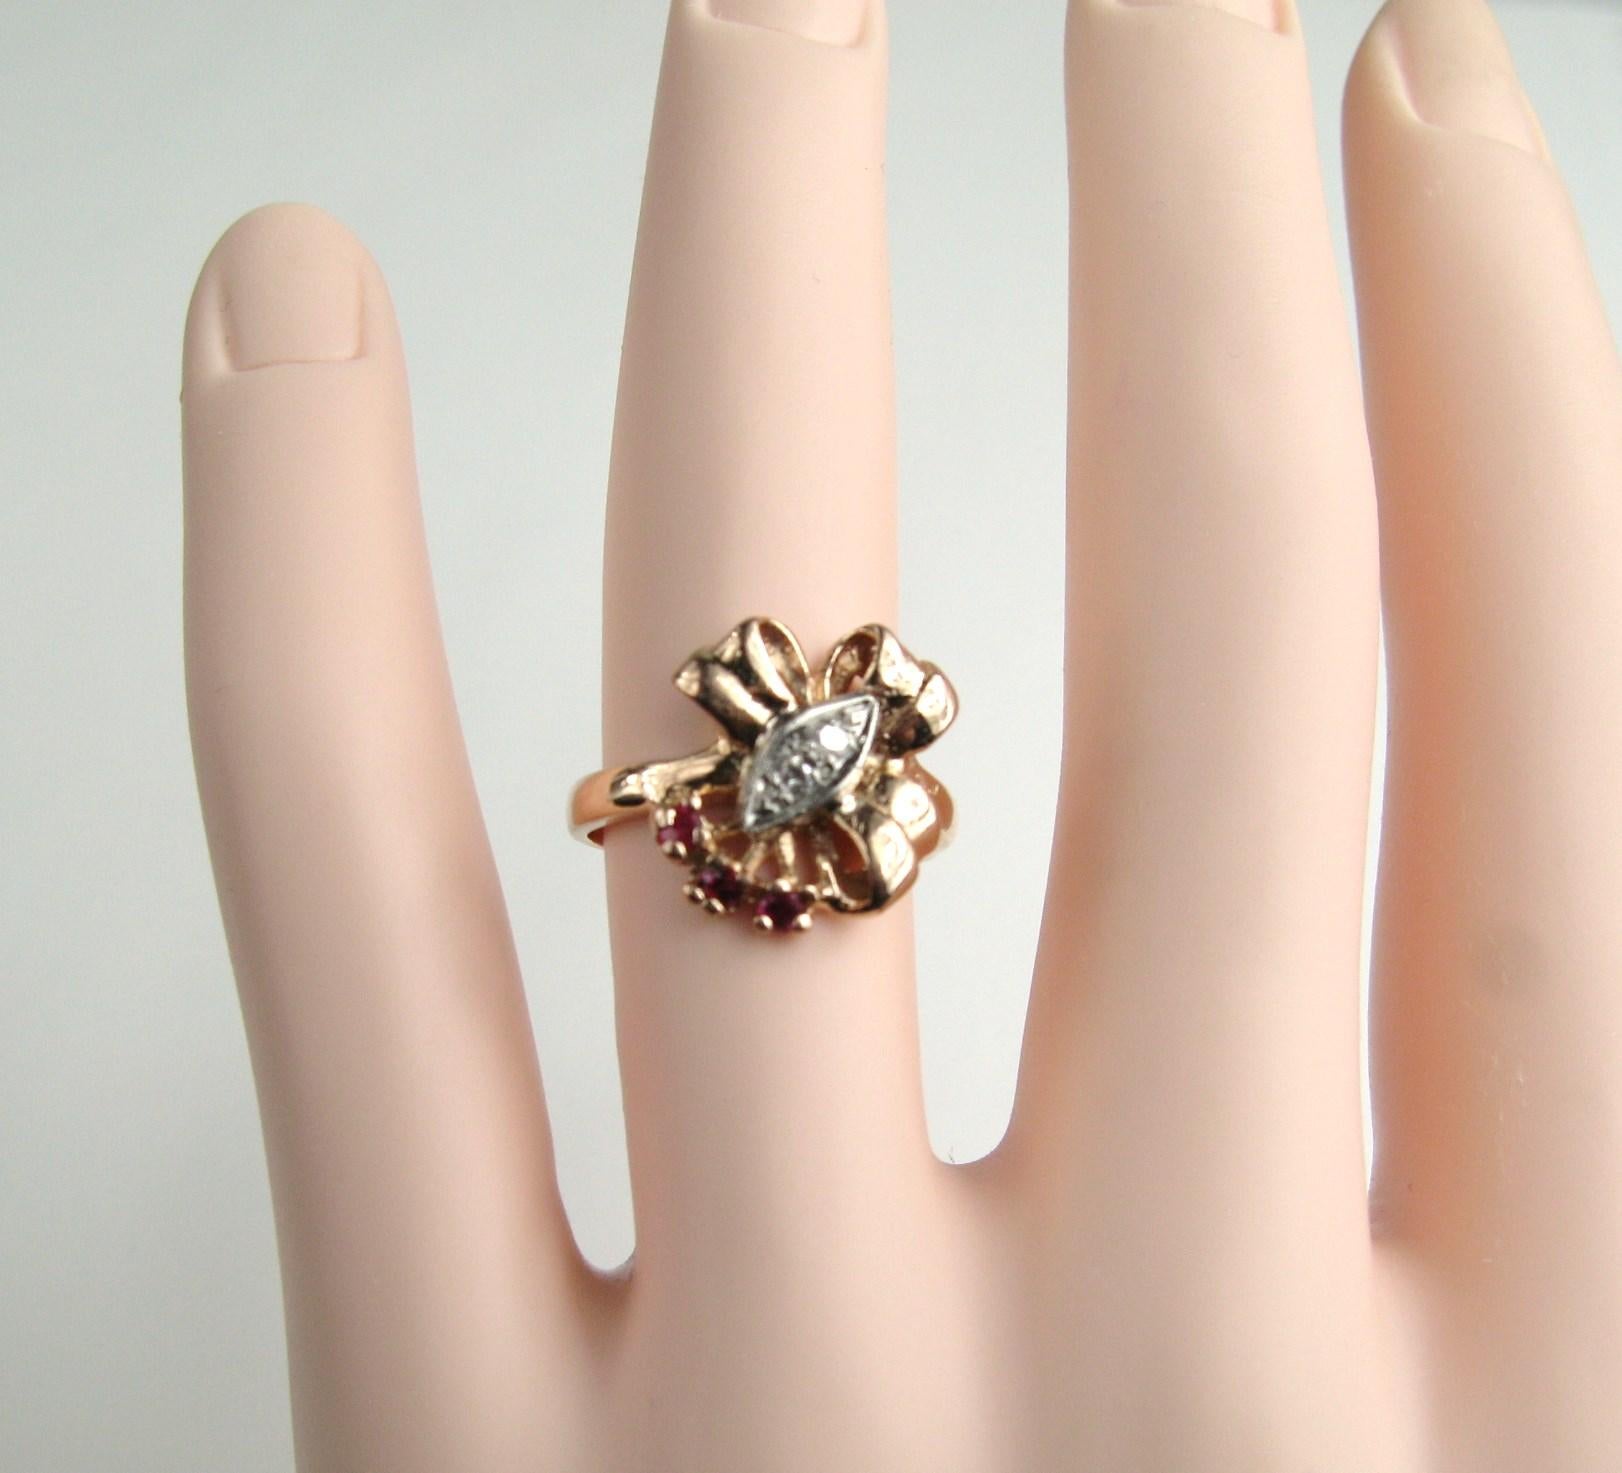 Delicate as a spring flower, this ring features prong set rubies and tiny accent diamonds set in 14K Rose Gold. The ring is a size 6.5 and can be sized by us or your jeweler. Measuring .57in. x .53in. This is out of a massive collection of